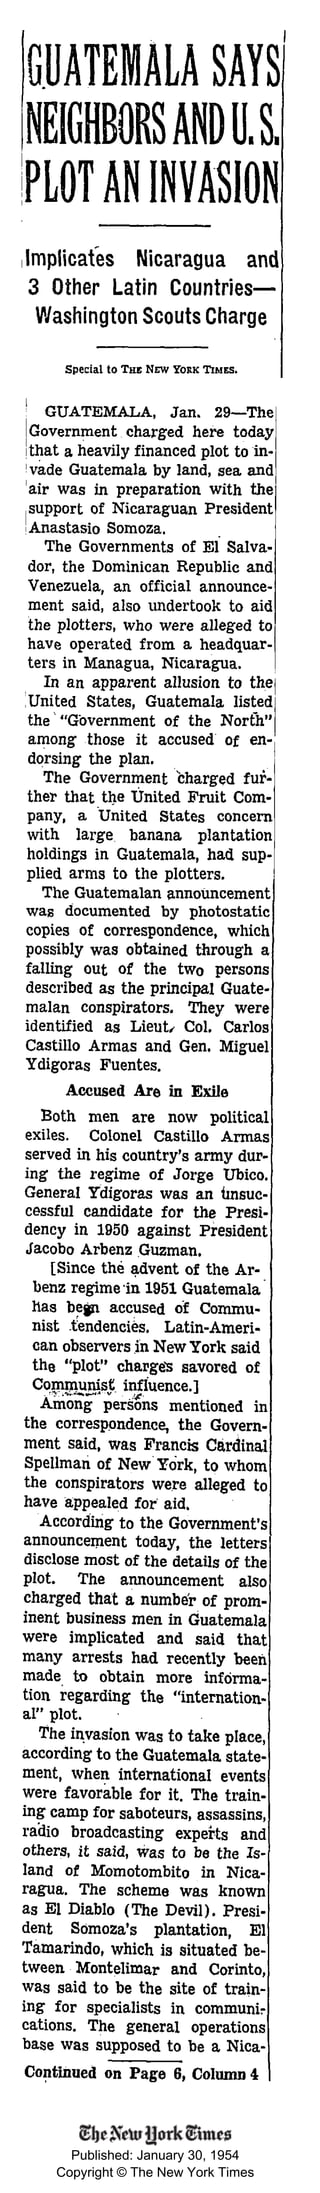 Published: January 30, 1954
Copyright © The New York Times
 